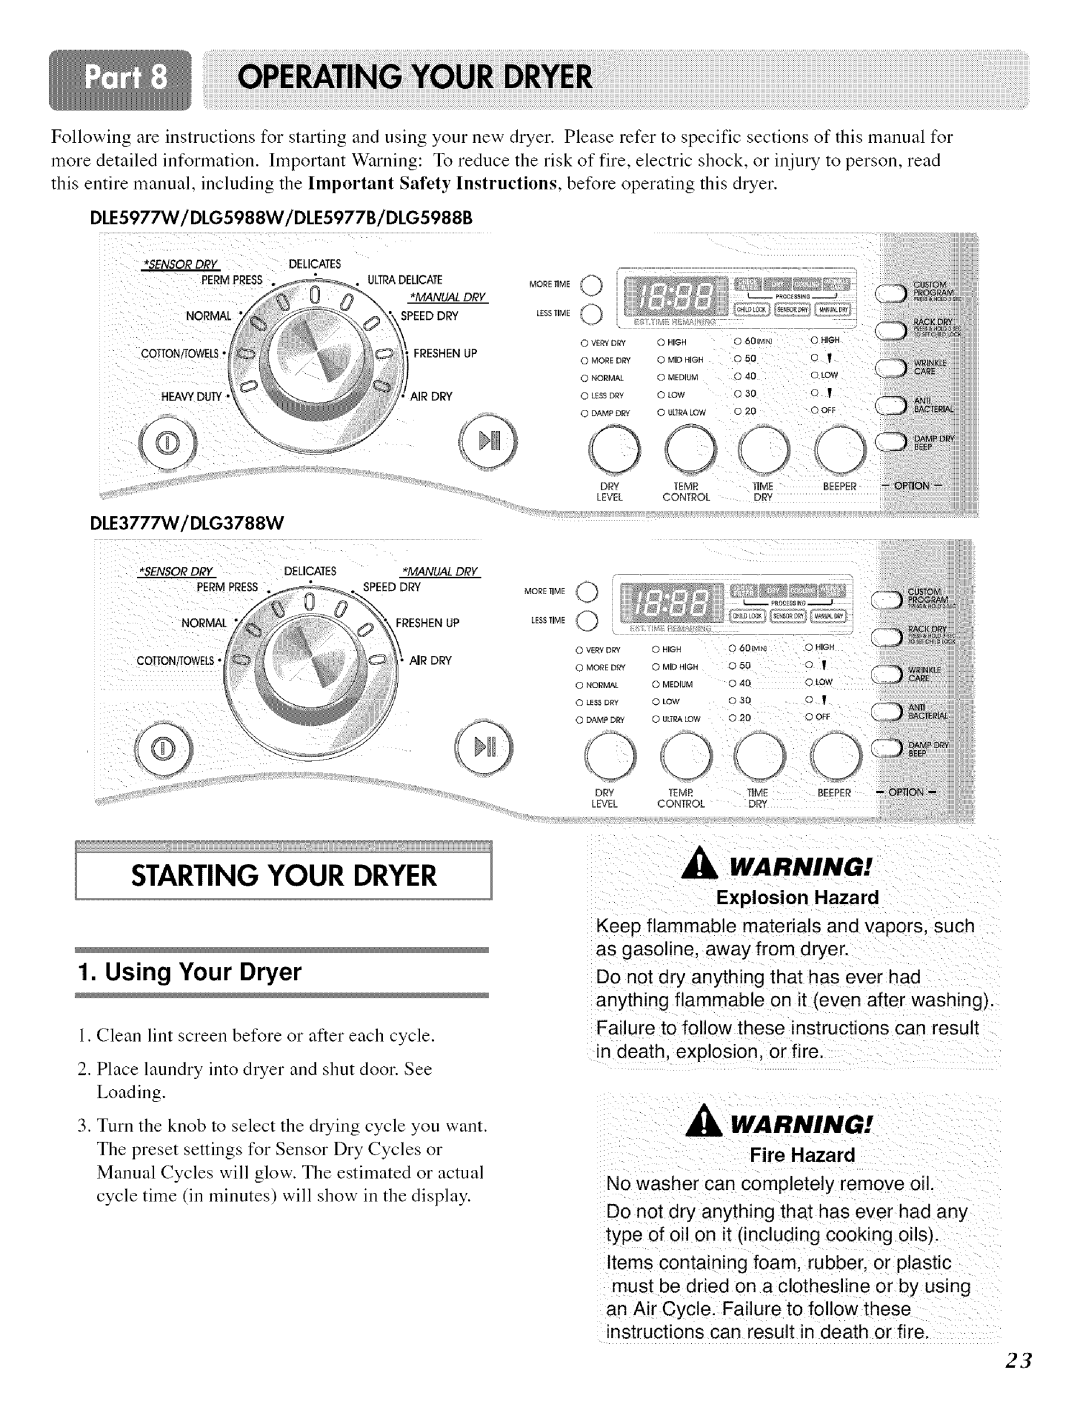 LG Electronics D 5988W, DLE 5977W, DLE 5977 B, D 5988 B owner manual Startingyour Dryer, Using Your Dryer, Loading 